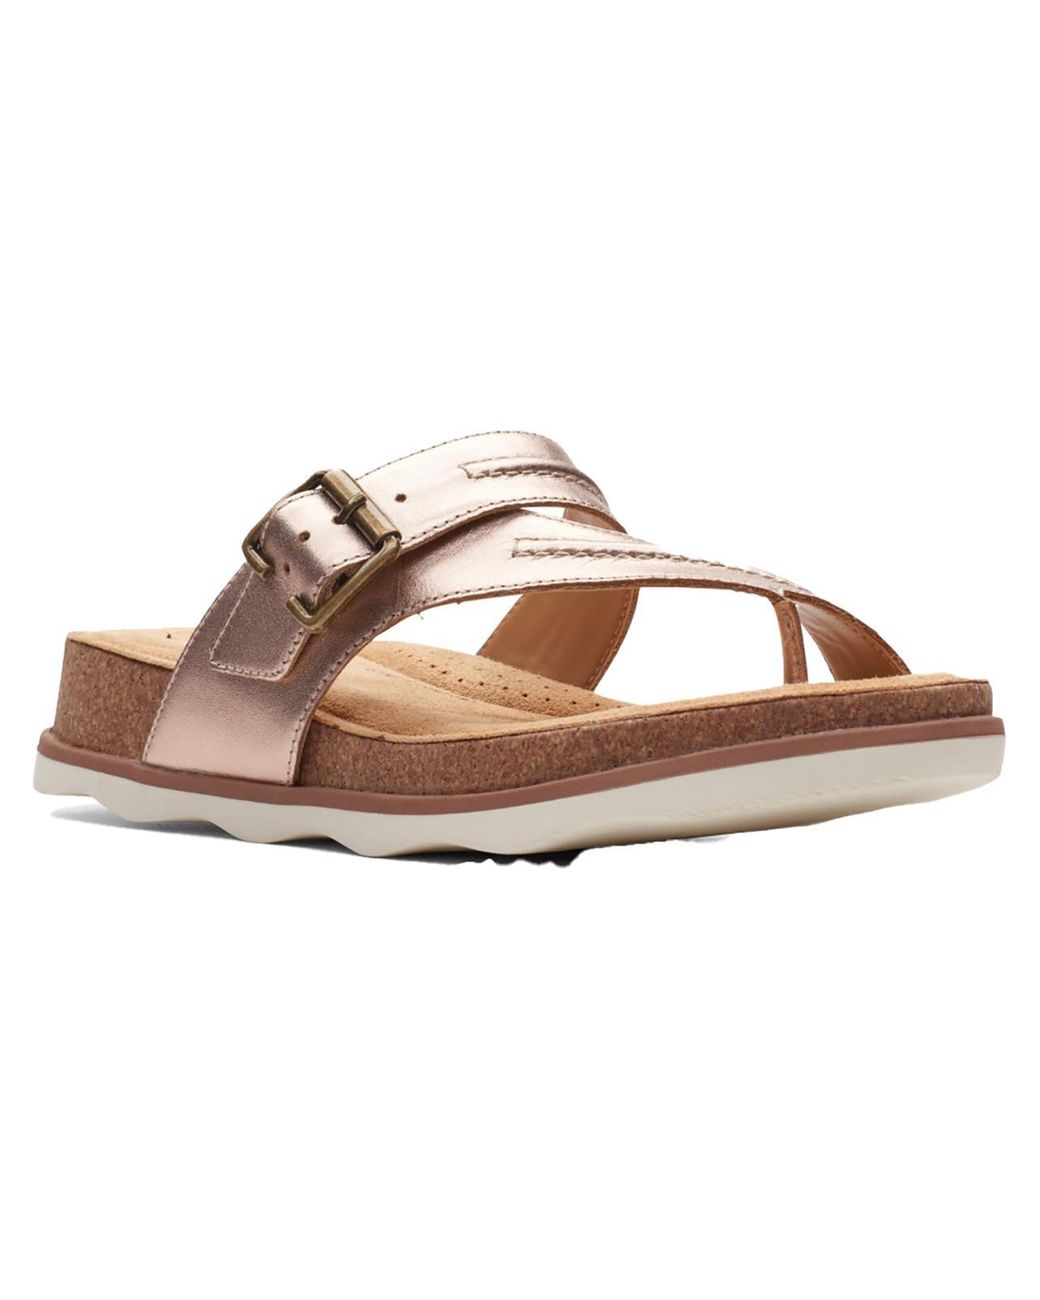 Clarks Brynn Madi Leather Strappy Slide Sandals in Brown | Lyst